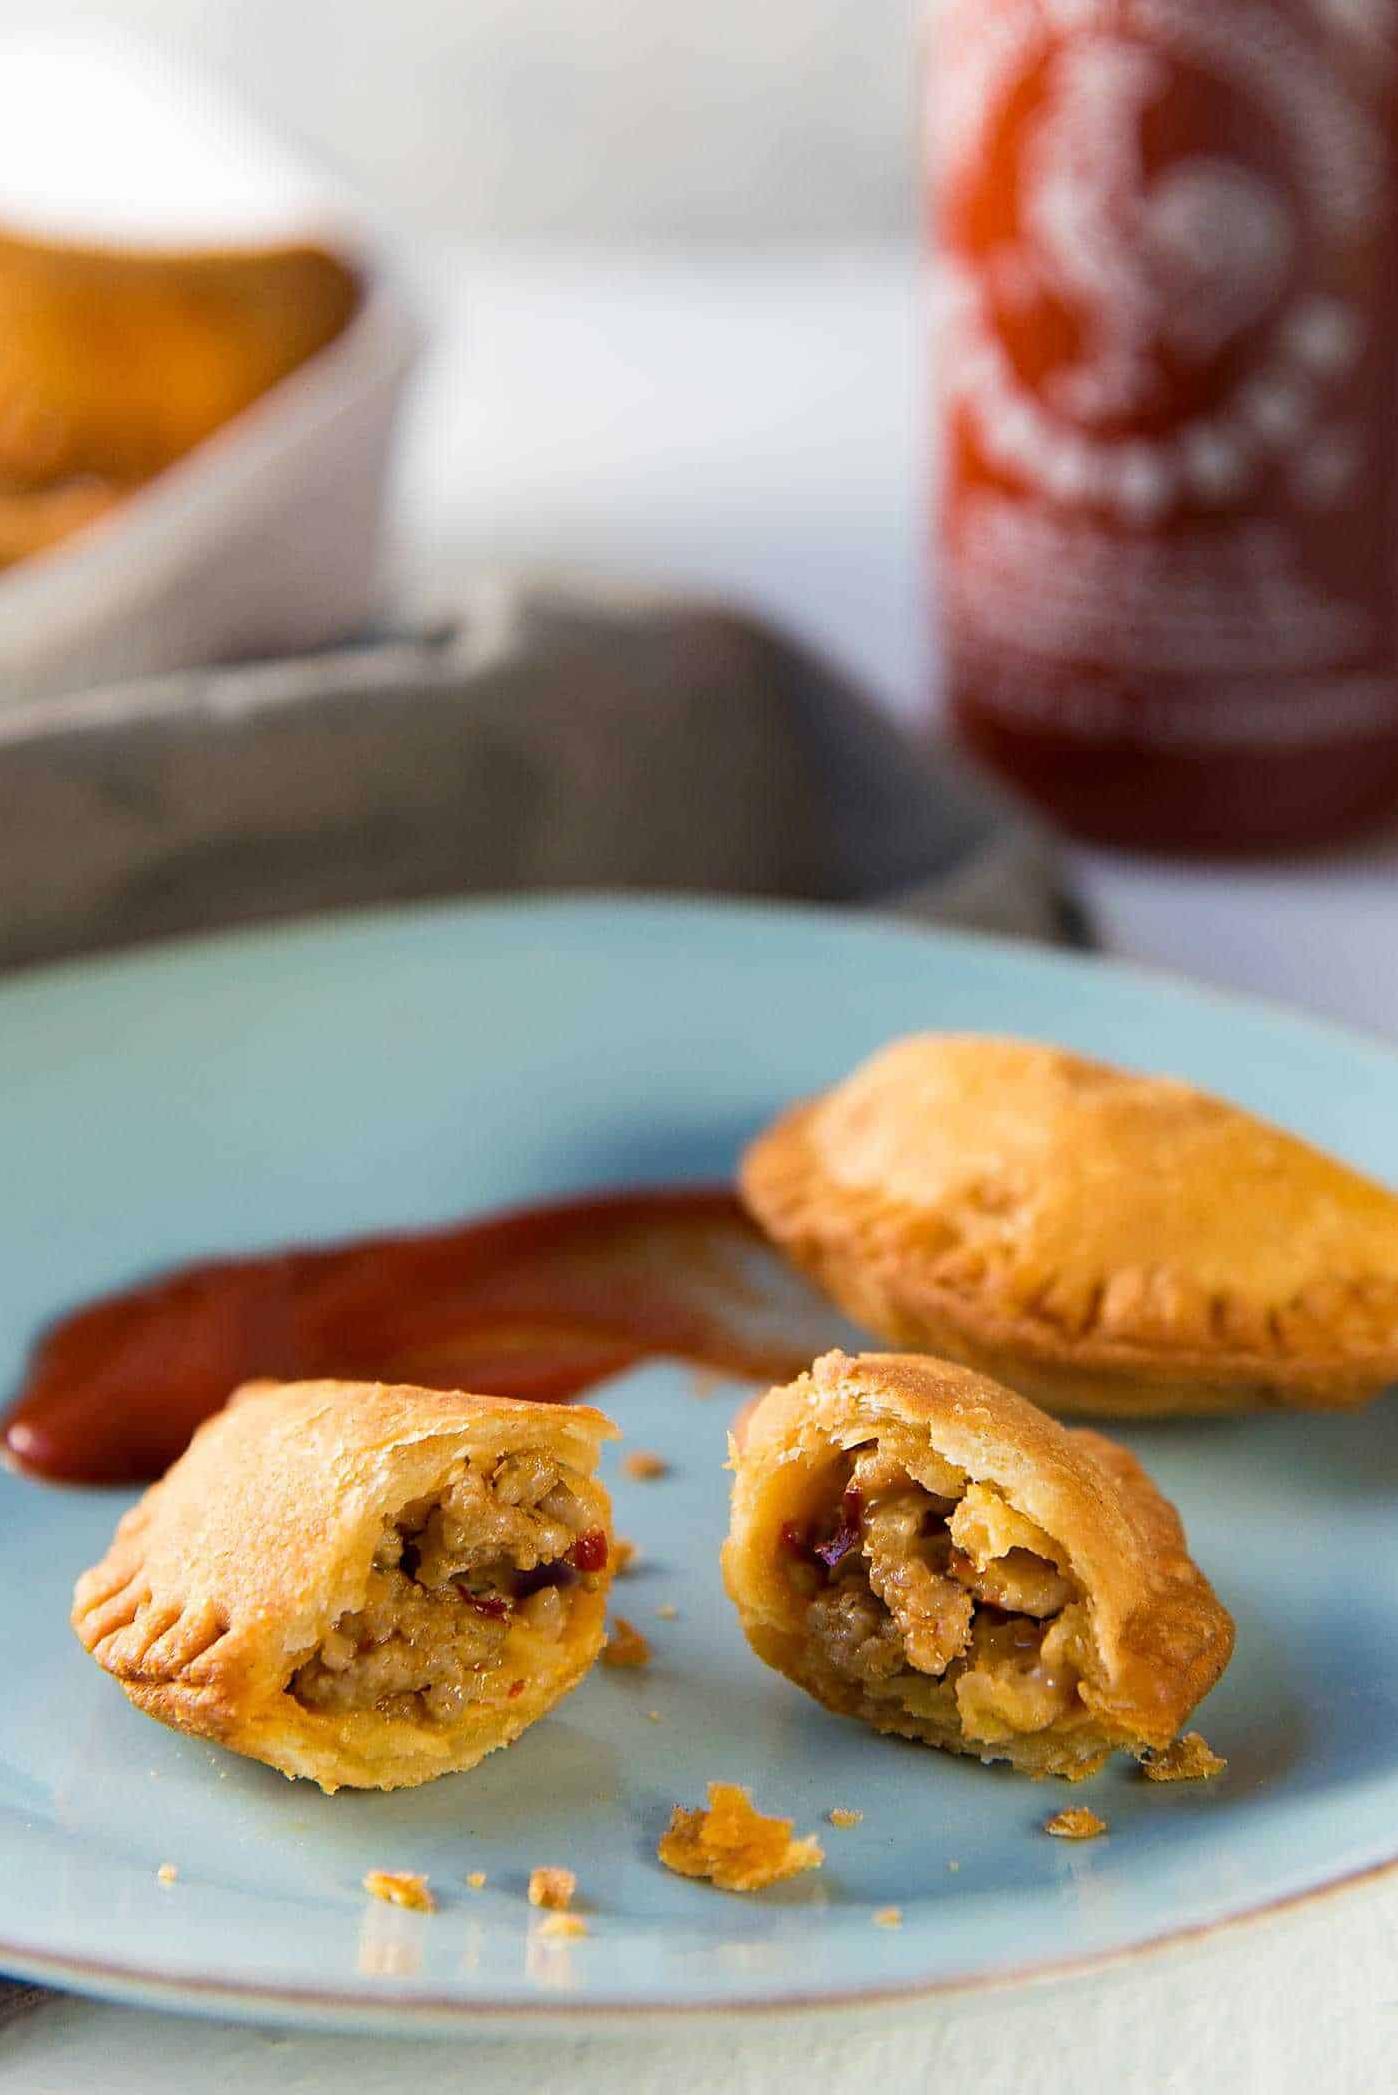  These empanadas will spice up your life!